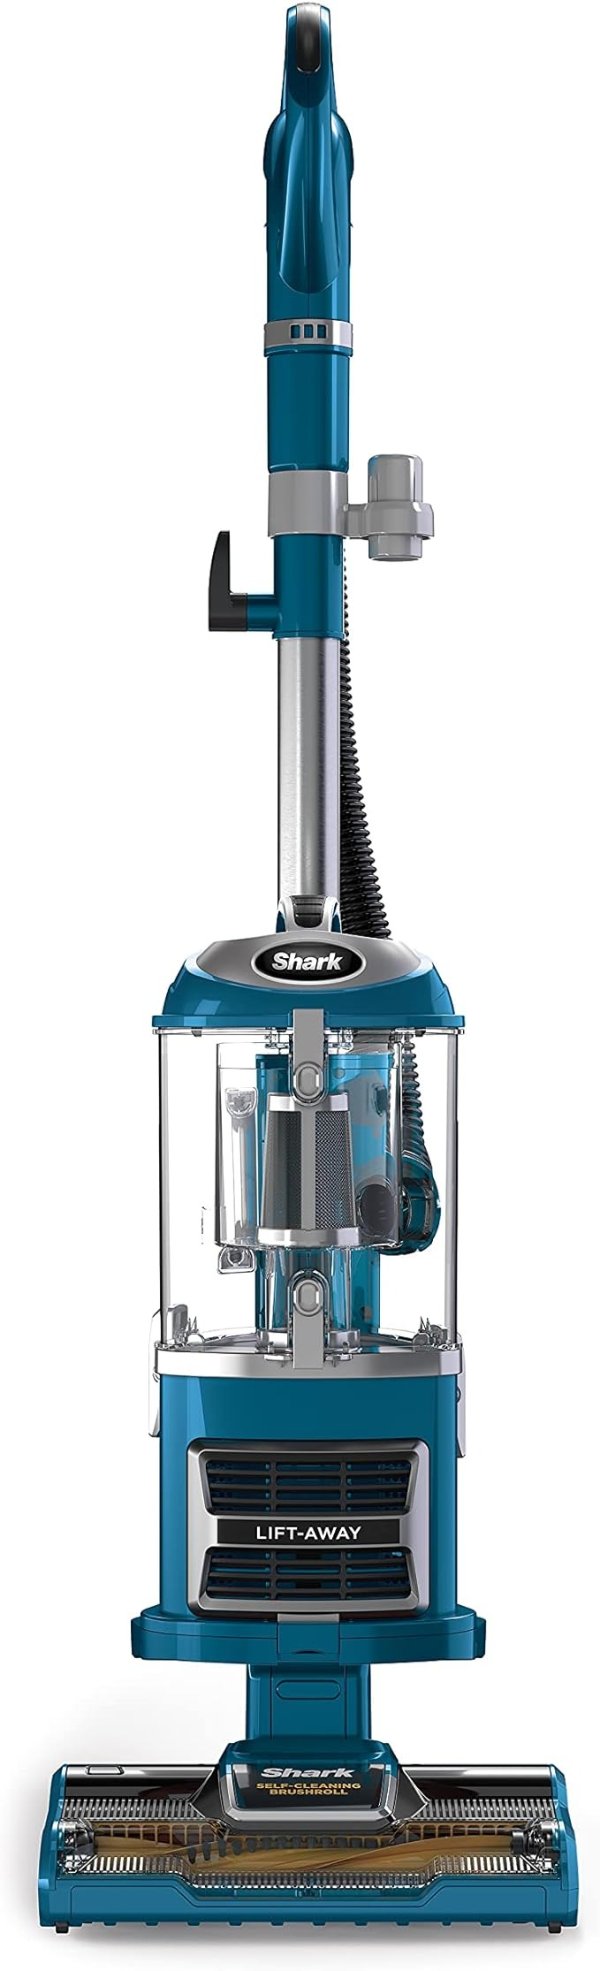 ZU503AMZ Navigator Lift-Away Upright Vacuum with Self-Cleaning Brushroll, HEPA Filter, Swivel Steering, Upholstery Tool & Pet Crevice Tool, Perfect for Pets & Multi-Surface Cleaning, Teal